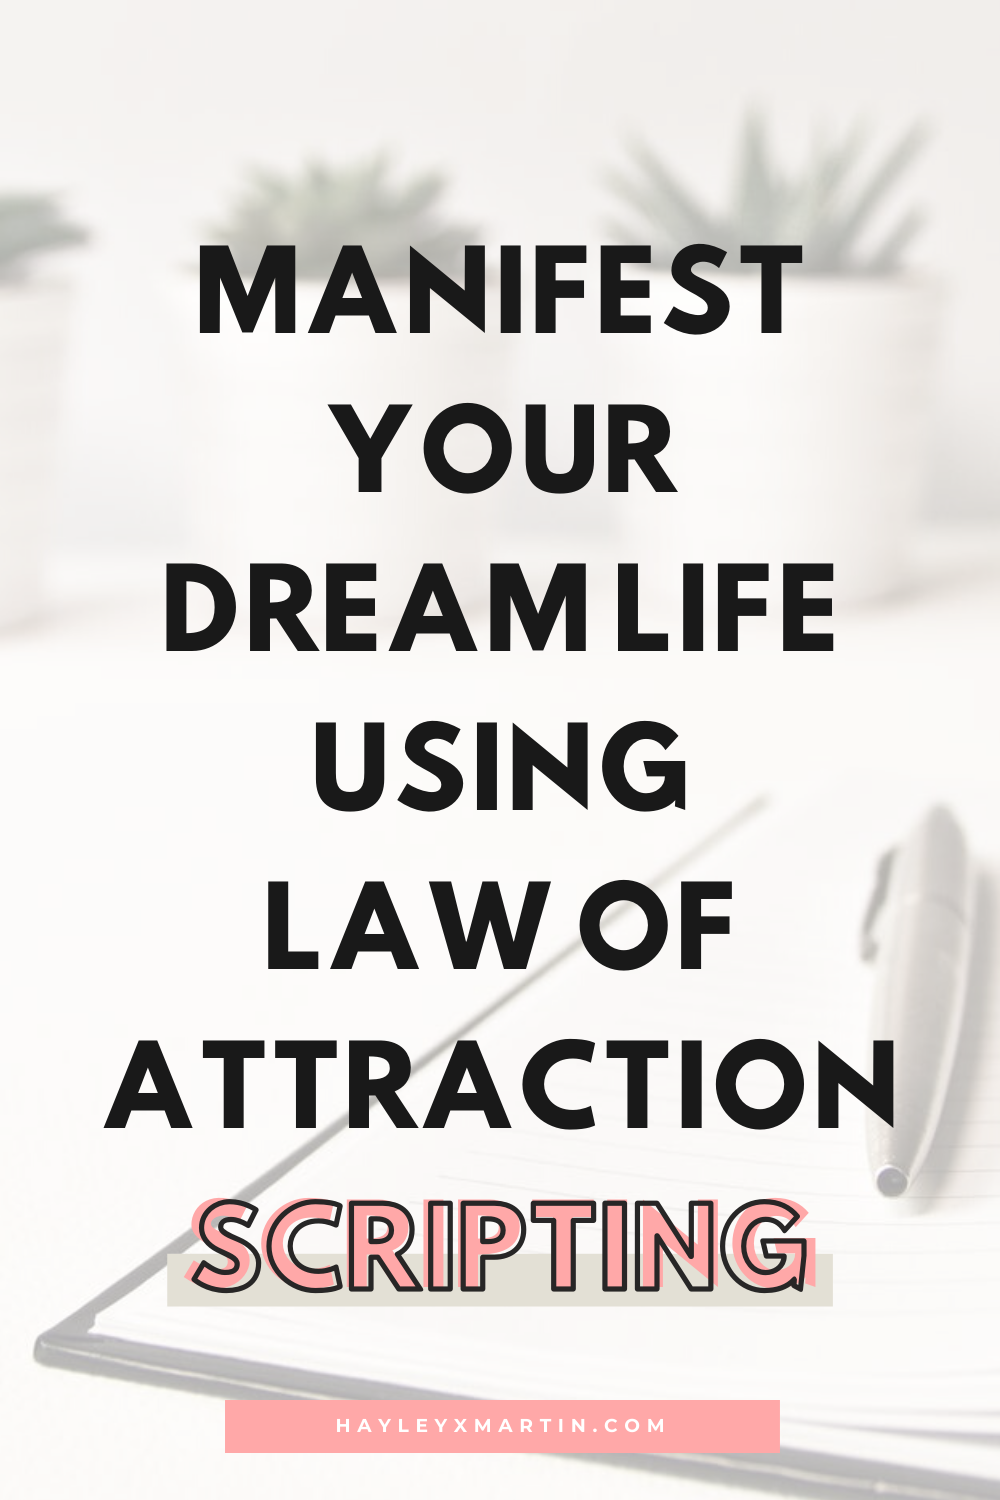 MANIFEST YOUR DREAM LIFE USING LAW OF ATTRACTION | HAYLEYXMARTIN